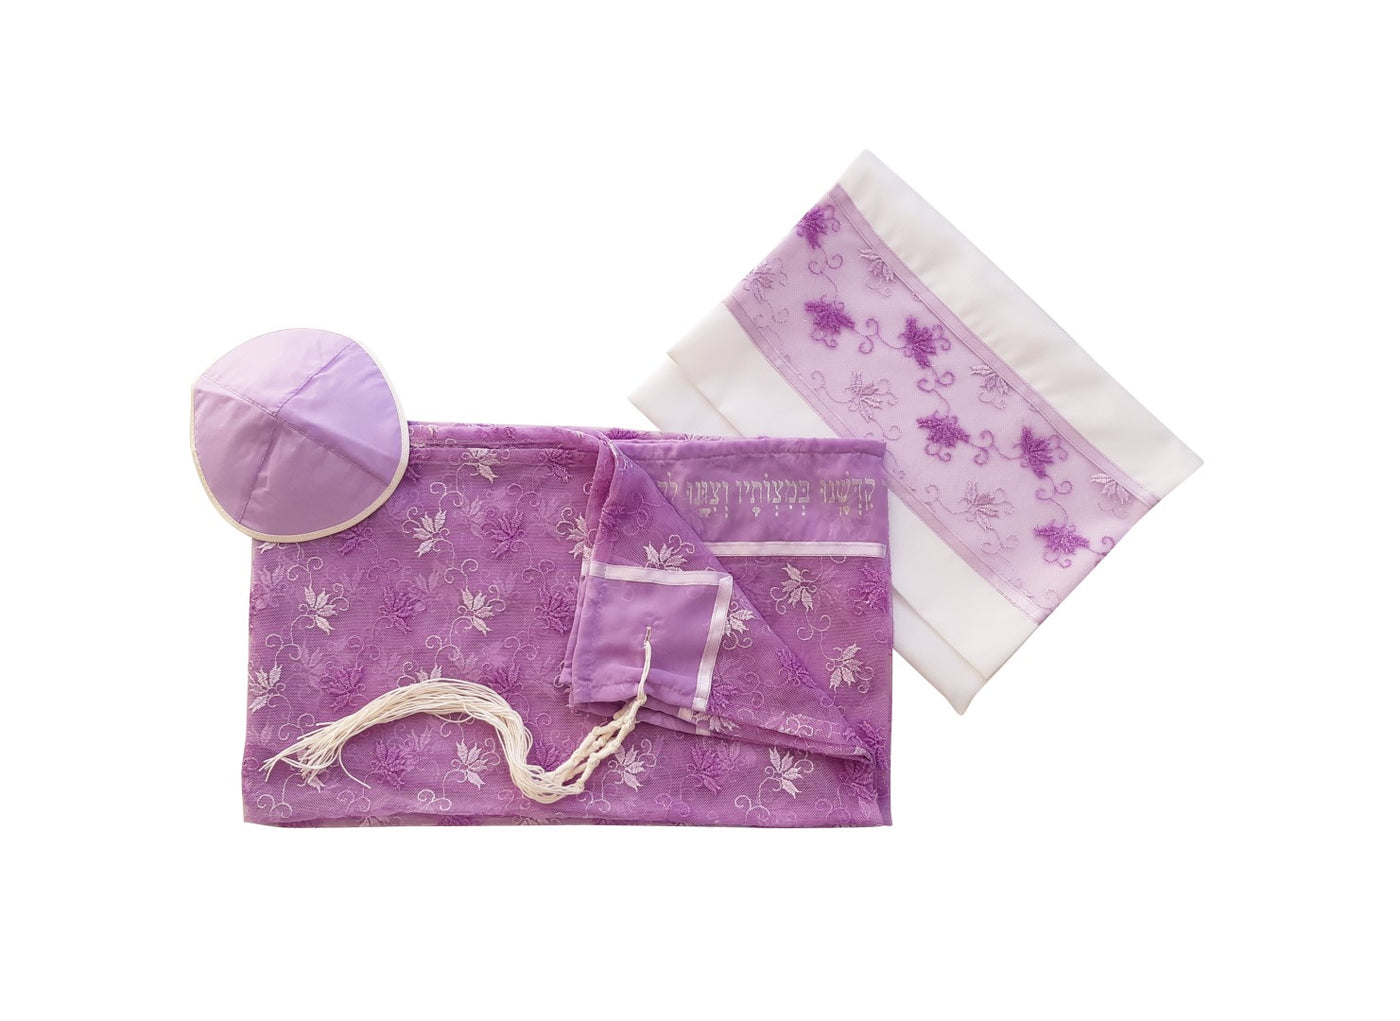 Delicate Lilac Floral Embroidery Tallit for women, Bat Mitzvah Tallit set, Tallit for Girl, Tzitzit